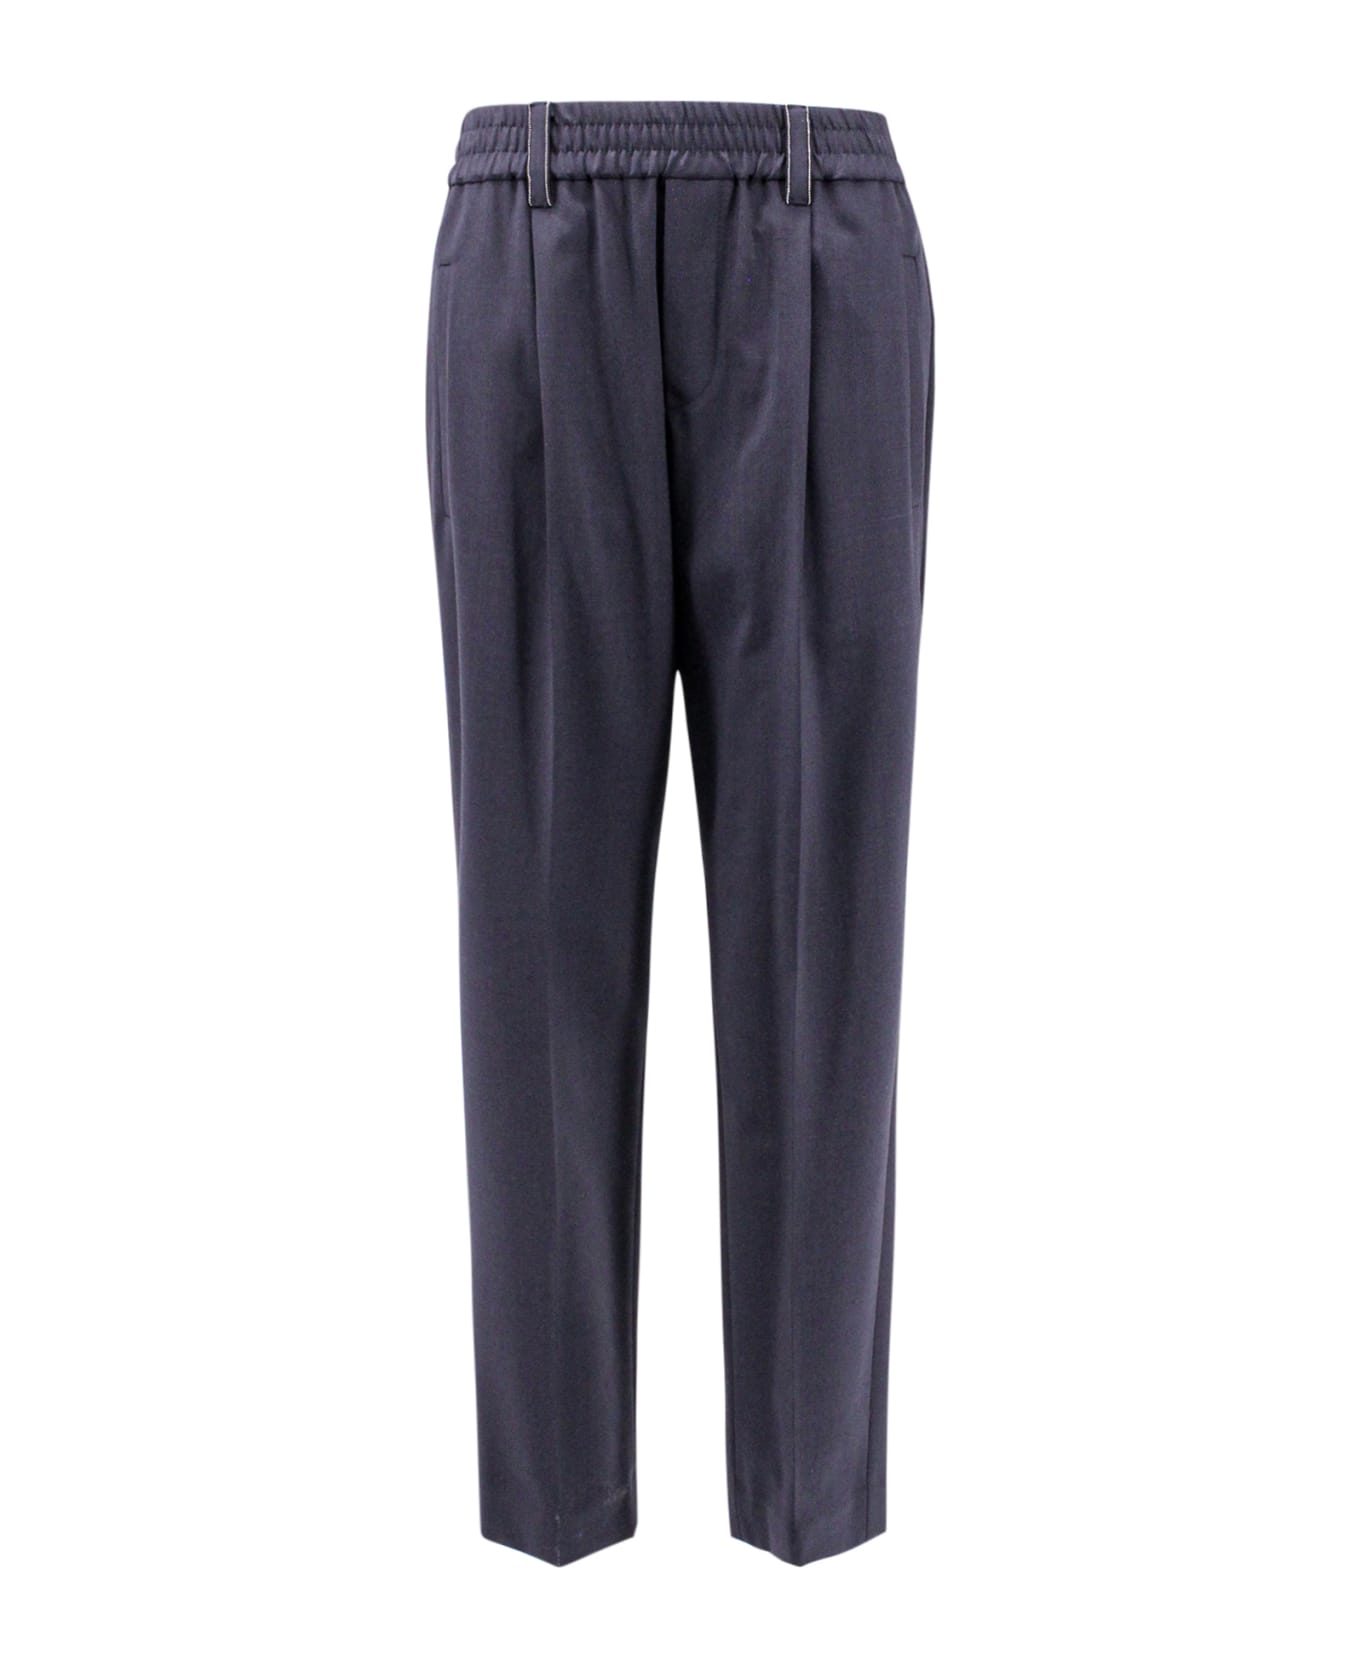 Brunello Cucinelli Trousers Made Of Fine Fresh Stretch Wool With Elastic Waistband And Side Welt Pockets - Blu